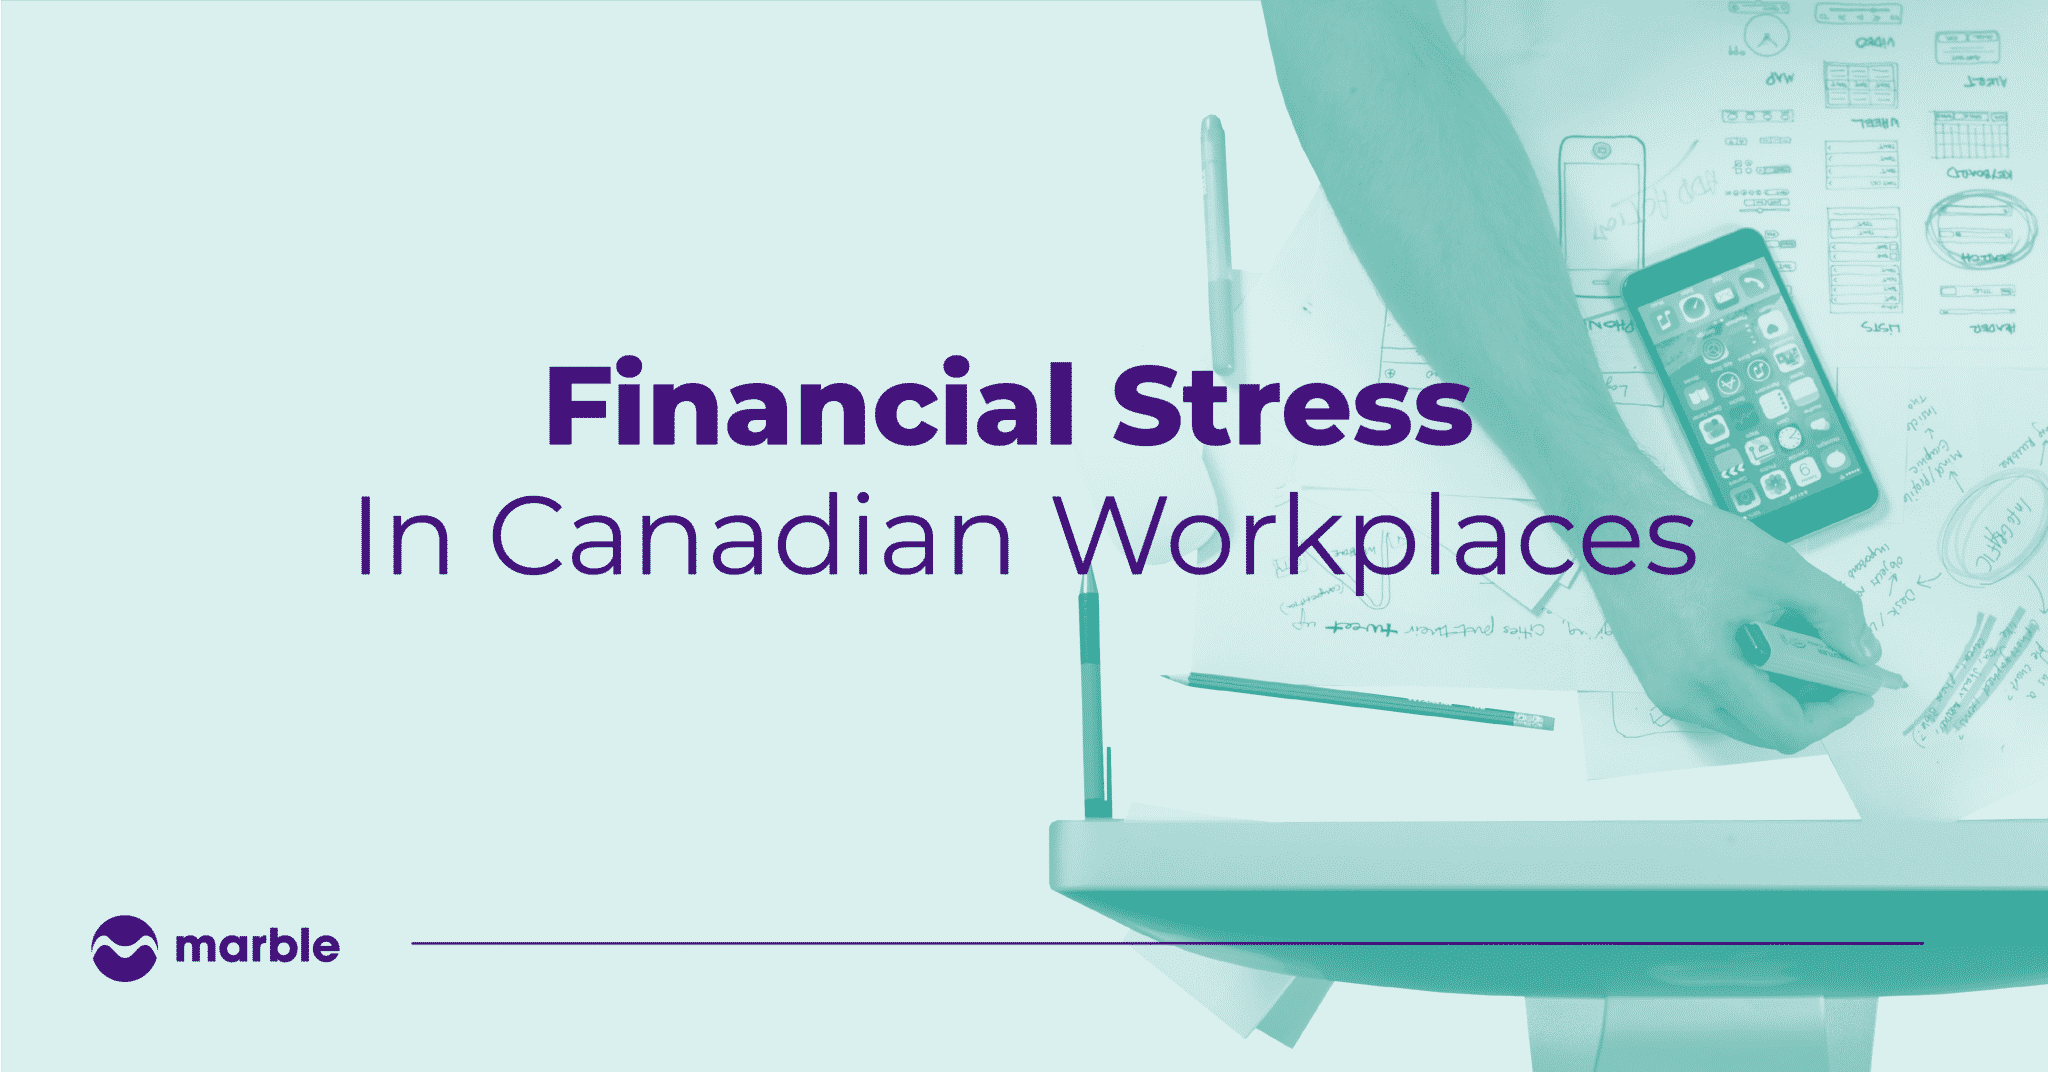 Financial stress in Canadian workplaces